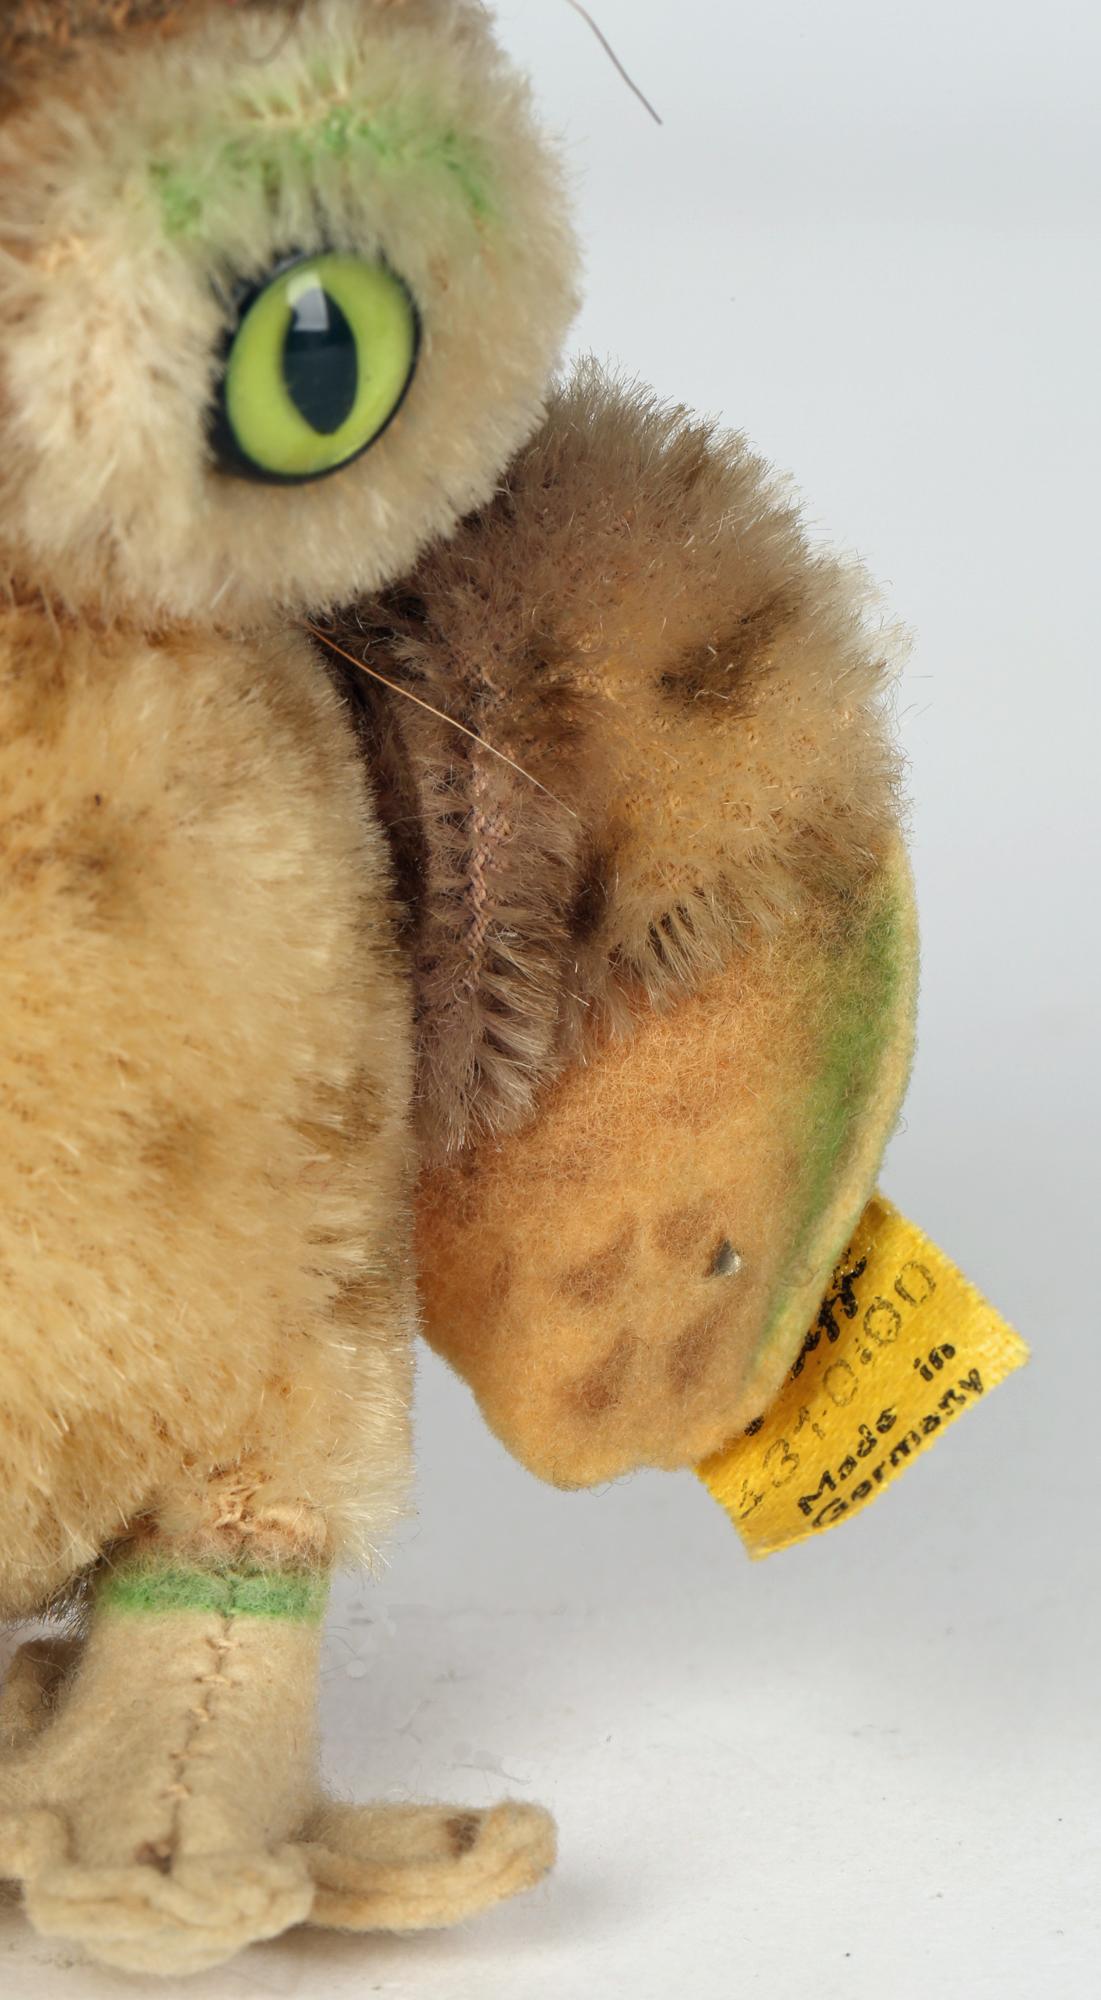 A good vintage German Steiff plush toy Wittie the Owl figure of small size retaining its original label and all important button dating from the 1950’s. The owl stands on two stiff velvet covered legs with its wings spread uranium glass eyes and